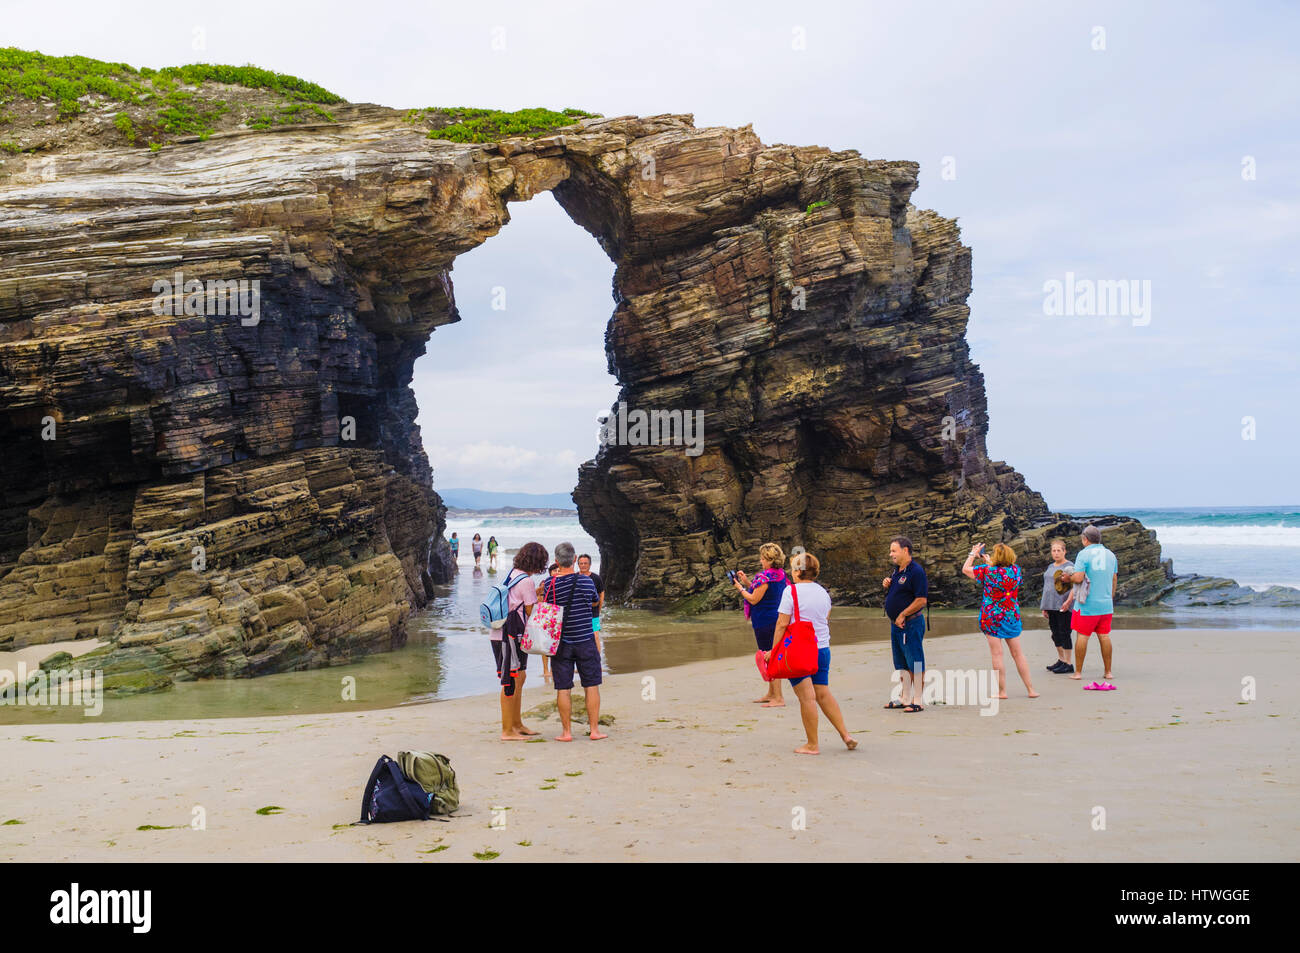 Group of tourists by a stone arch at Beach of the Cathedrals Natural Monument at Ribadeo municipality, Lugo province, Galicia, Spain, Europe Stock Photo